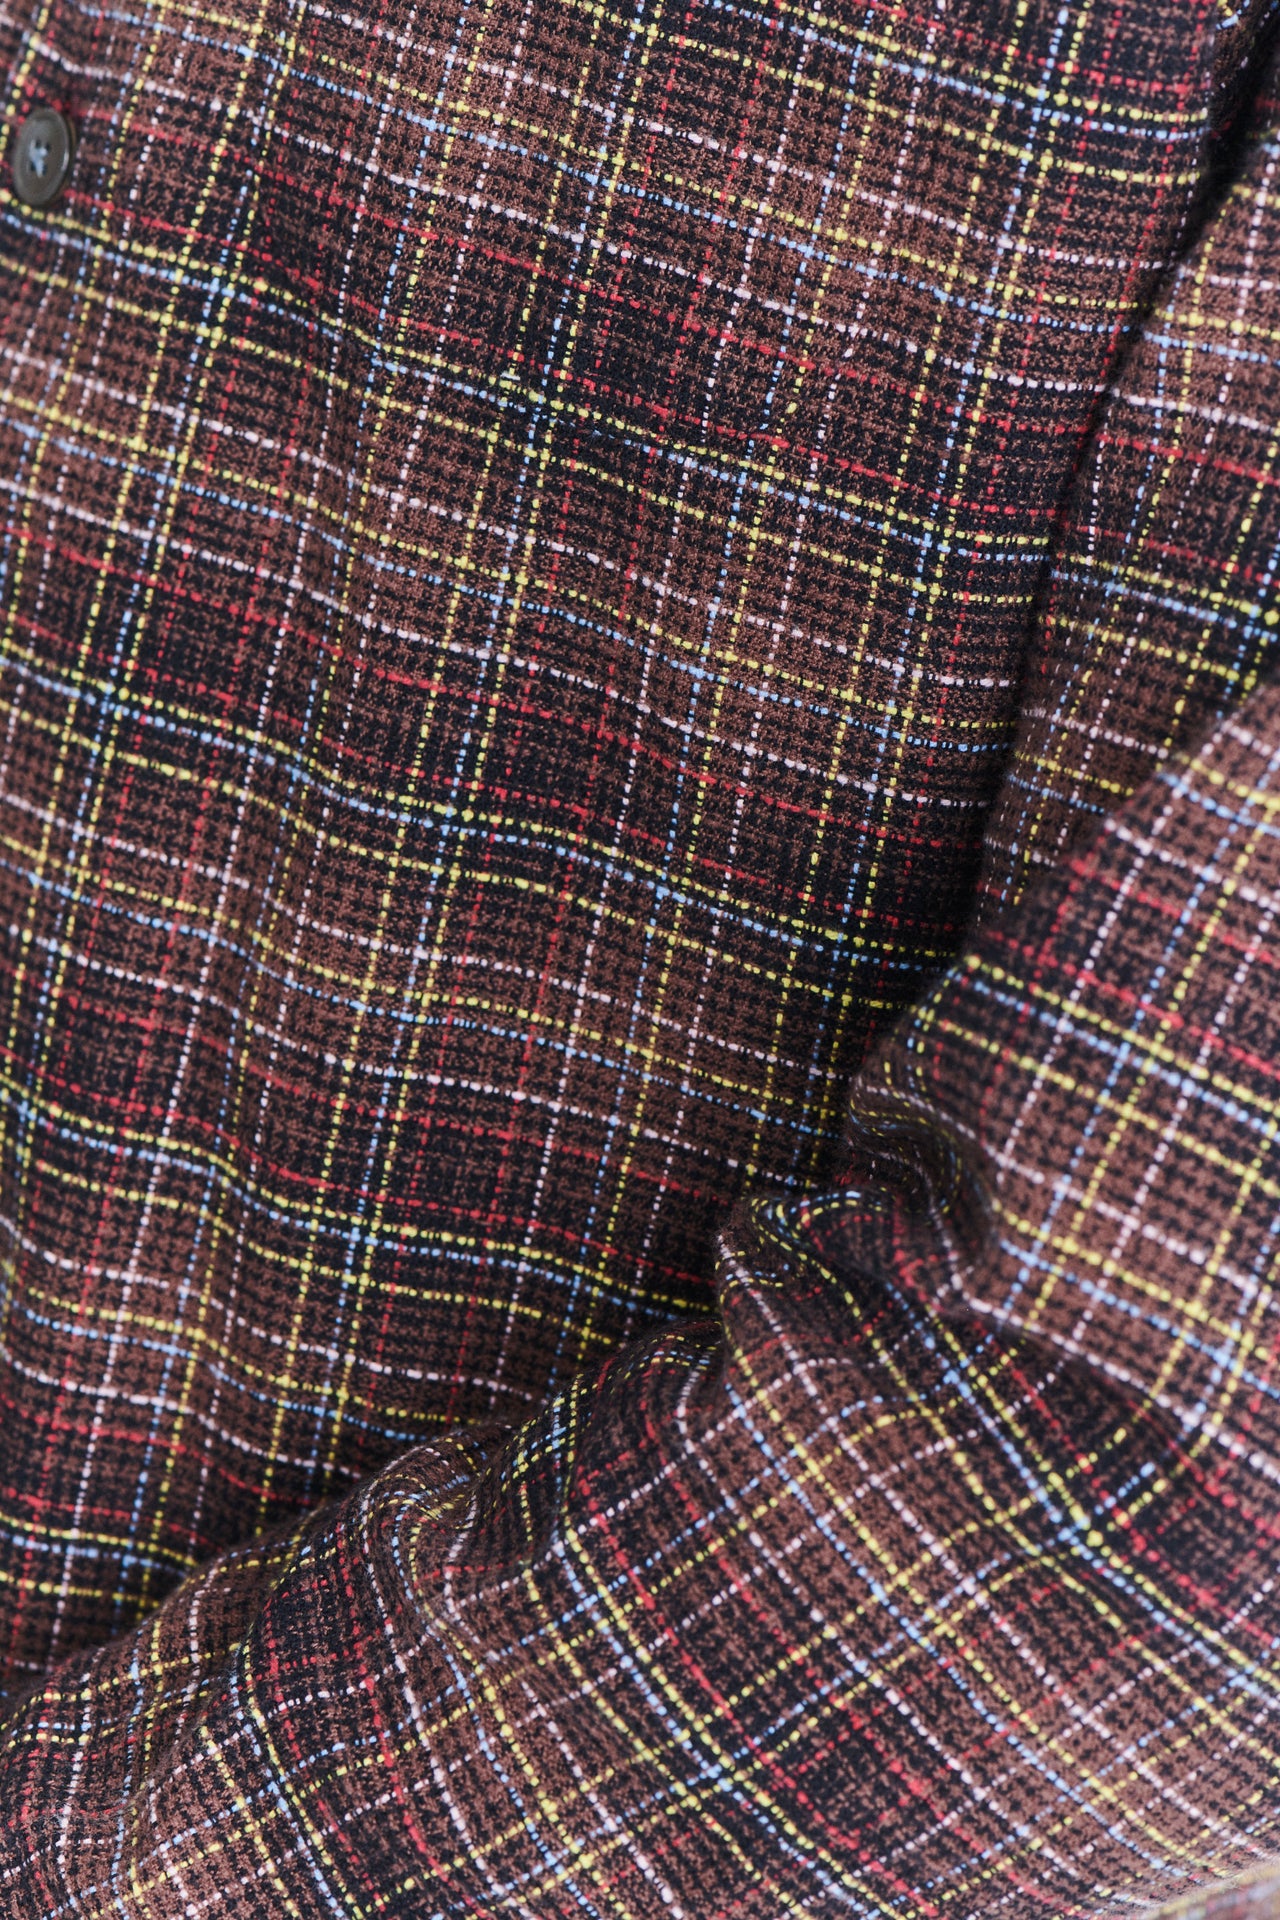 Strong Shirt a Brown, Yellow, White and Red Chequered Portuguese Cotton